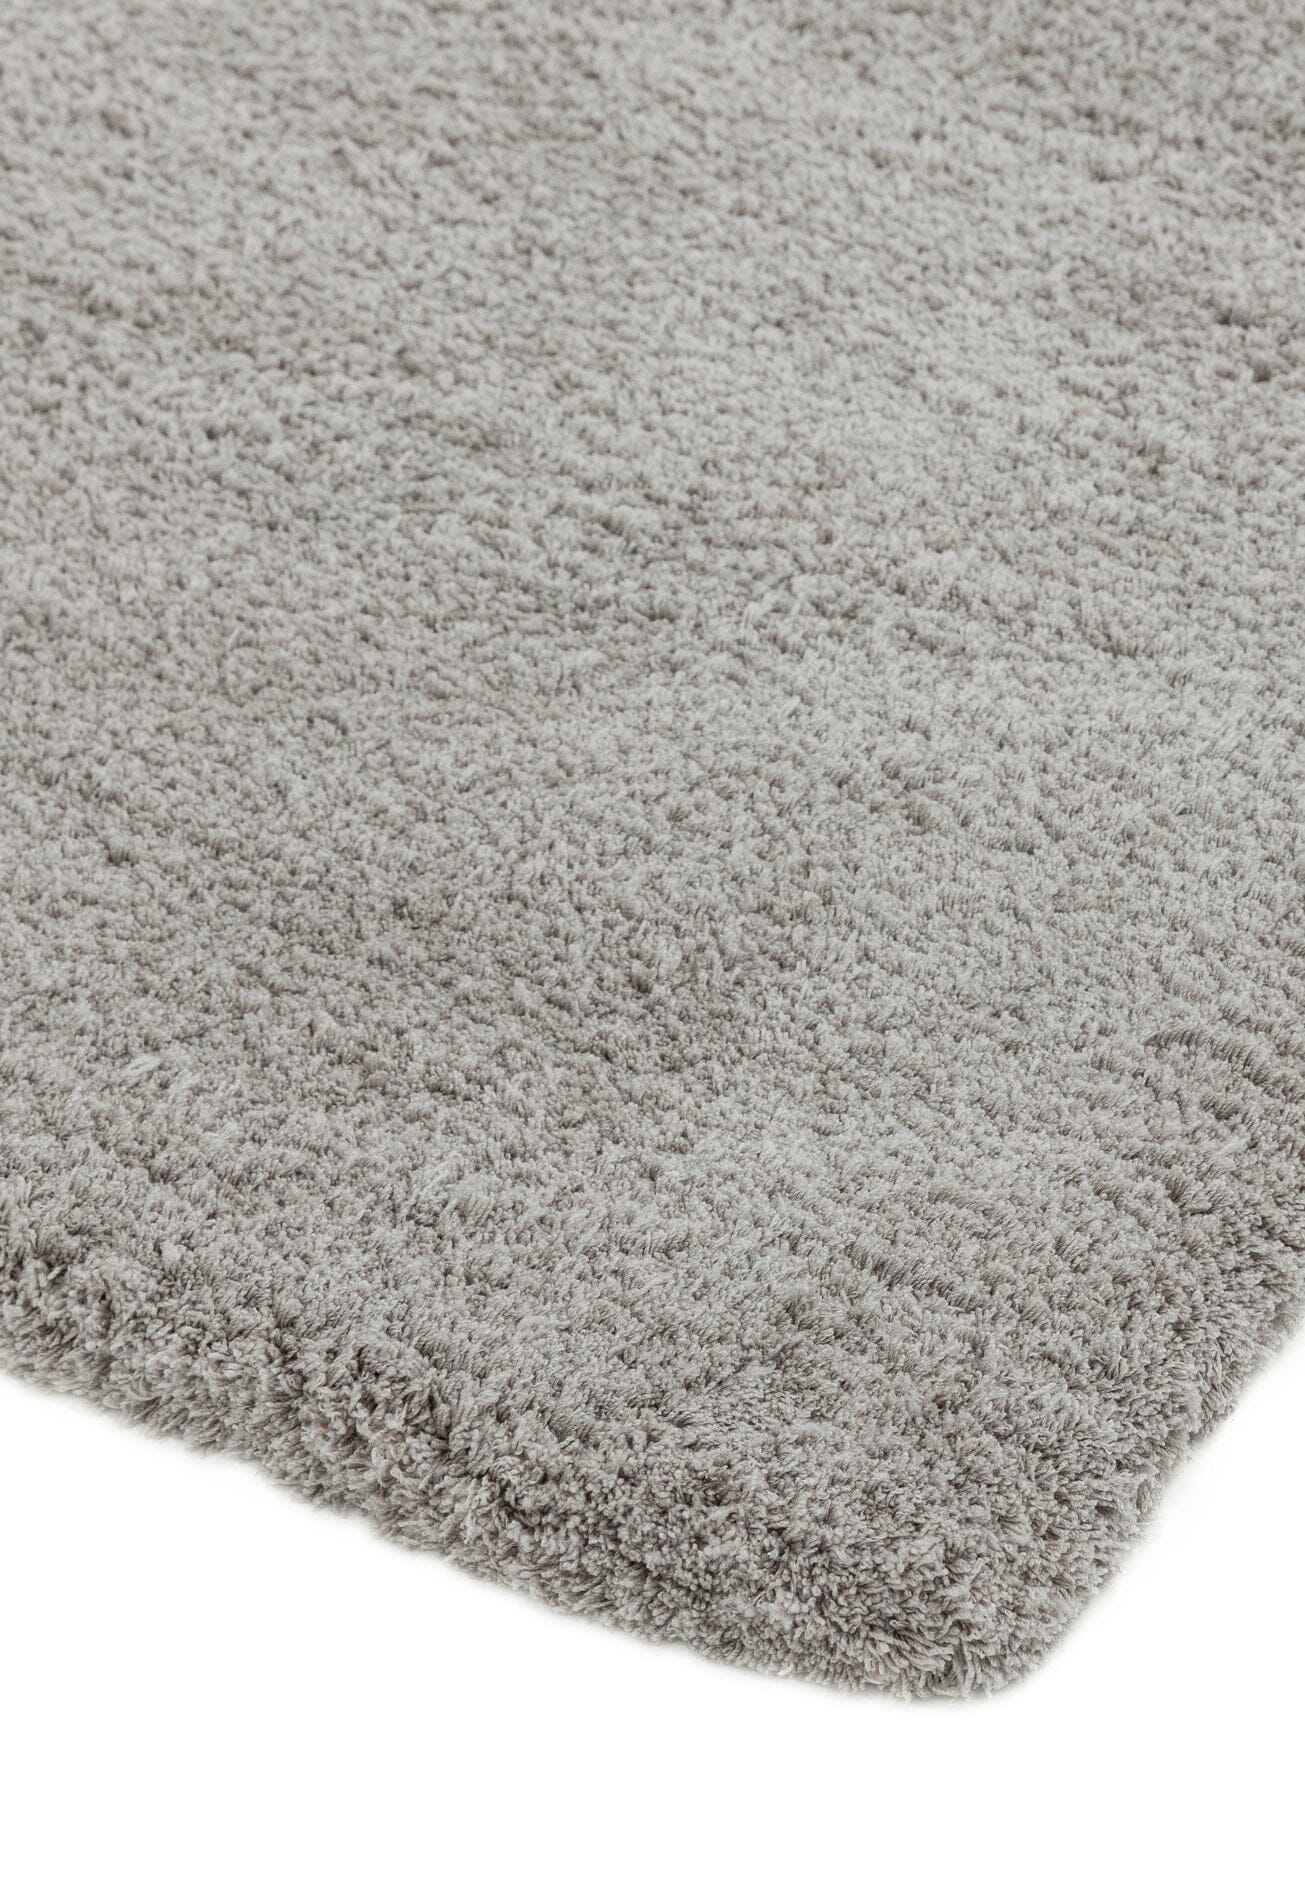 Asiatic Carpets Lulu Soft Touch Table Tufted Rug Silver - 200 x 290cm